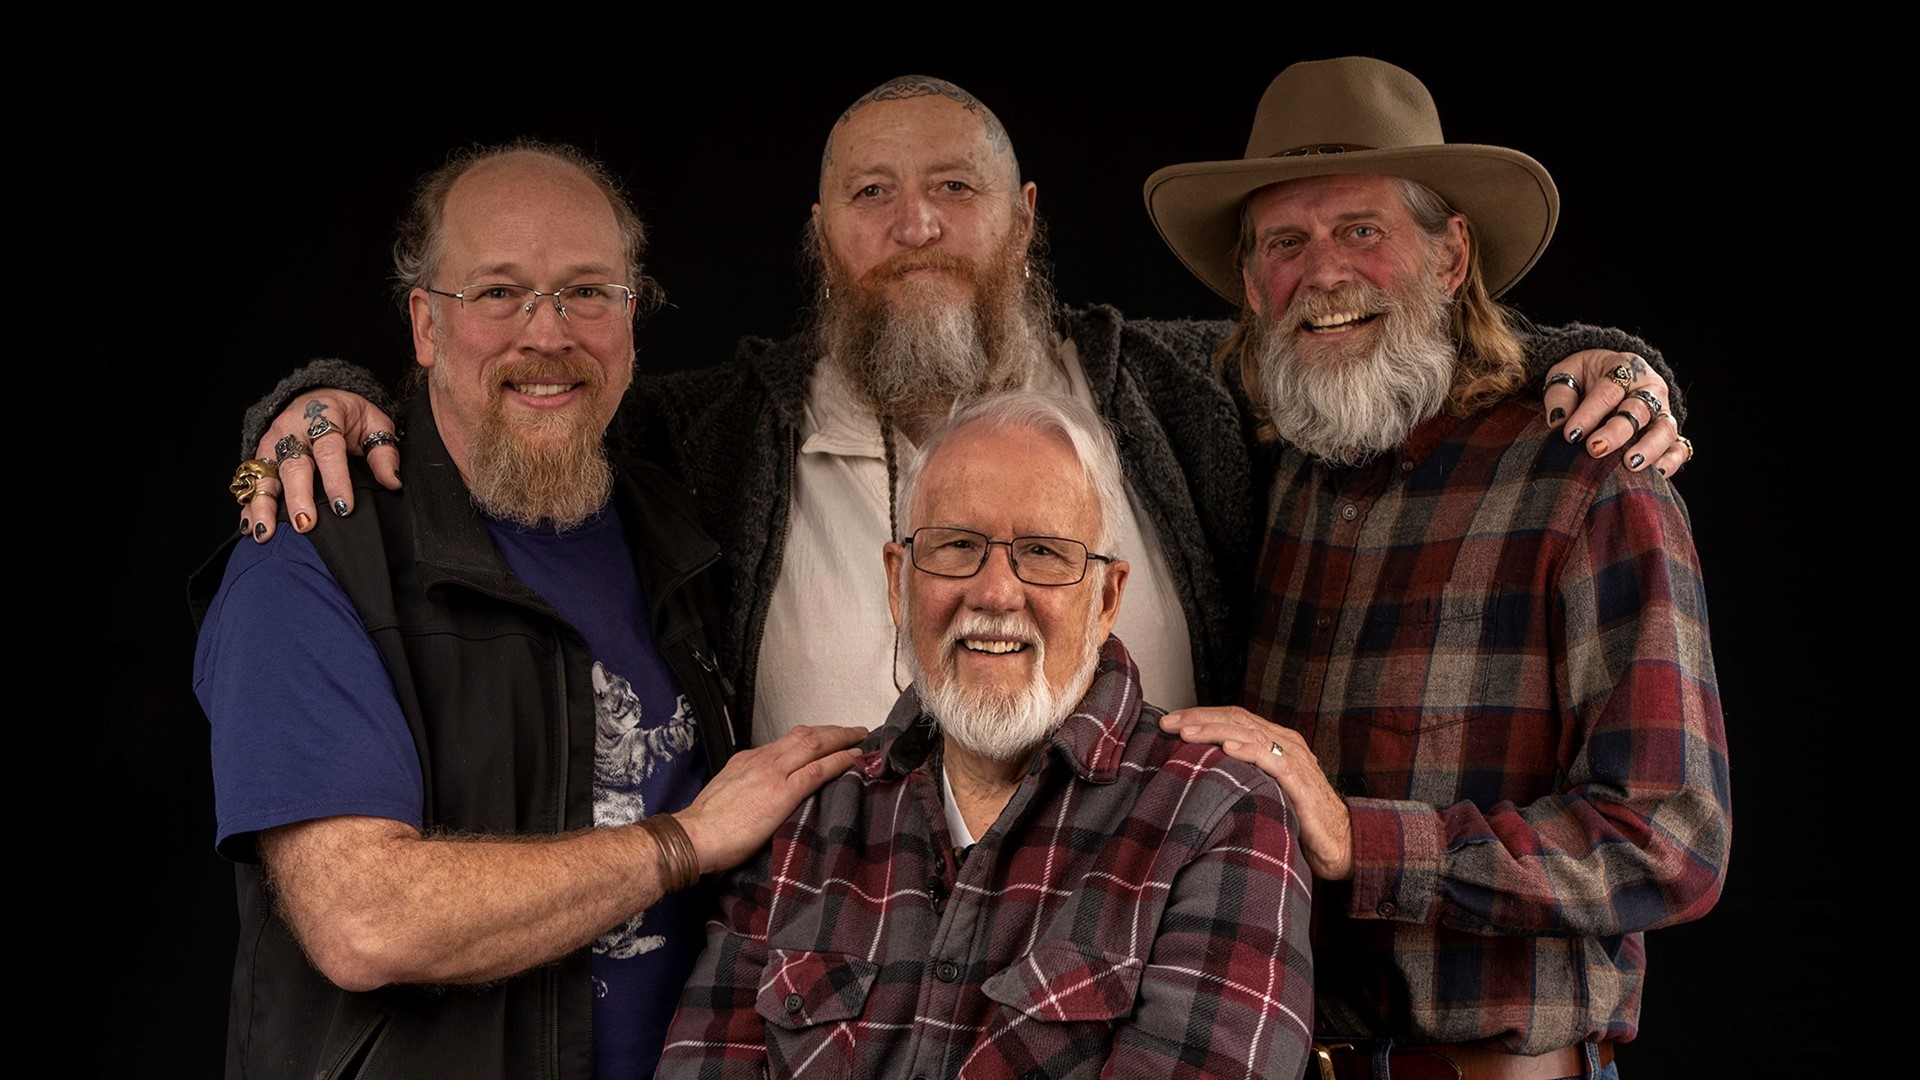 Why the Whidbey Beard Project is about far more than facial hair. #k5evening